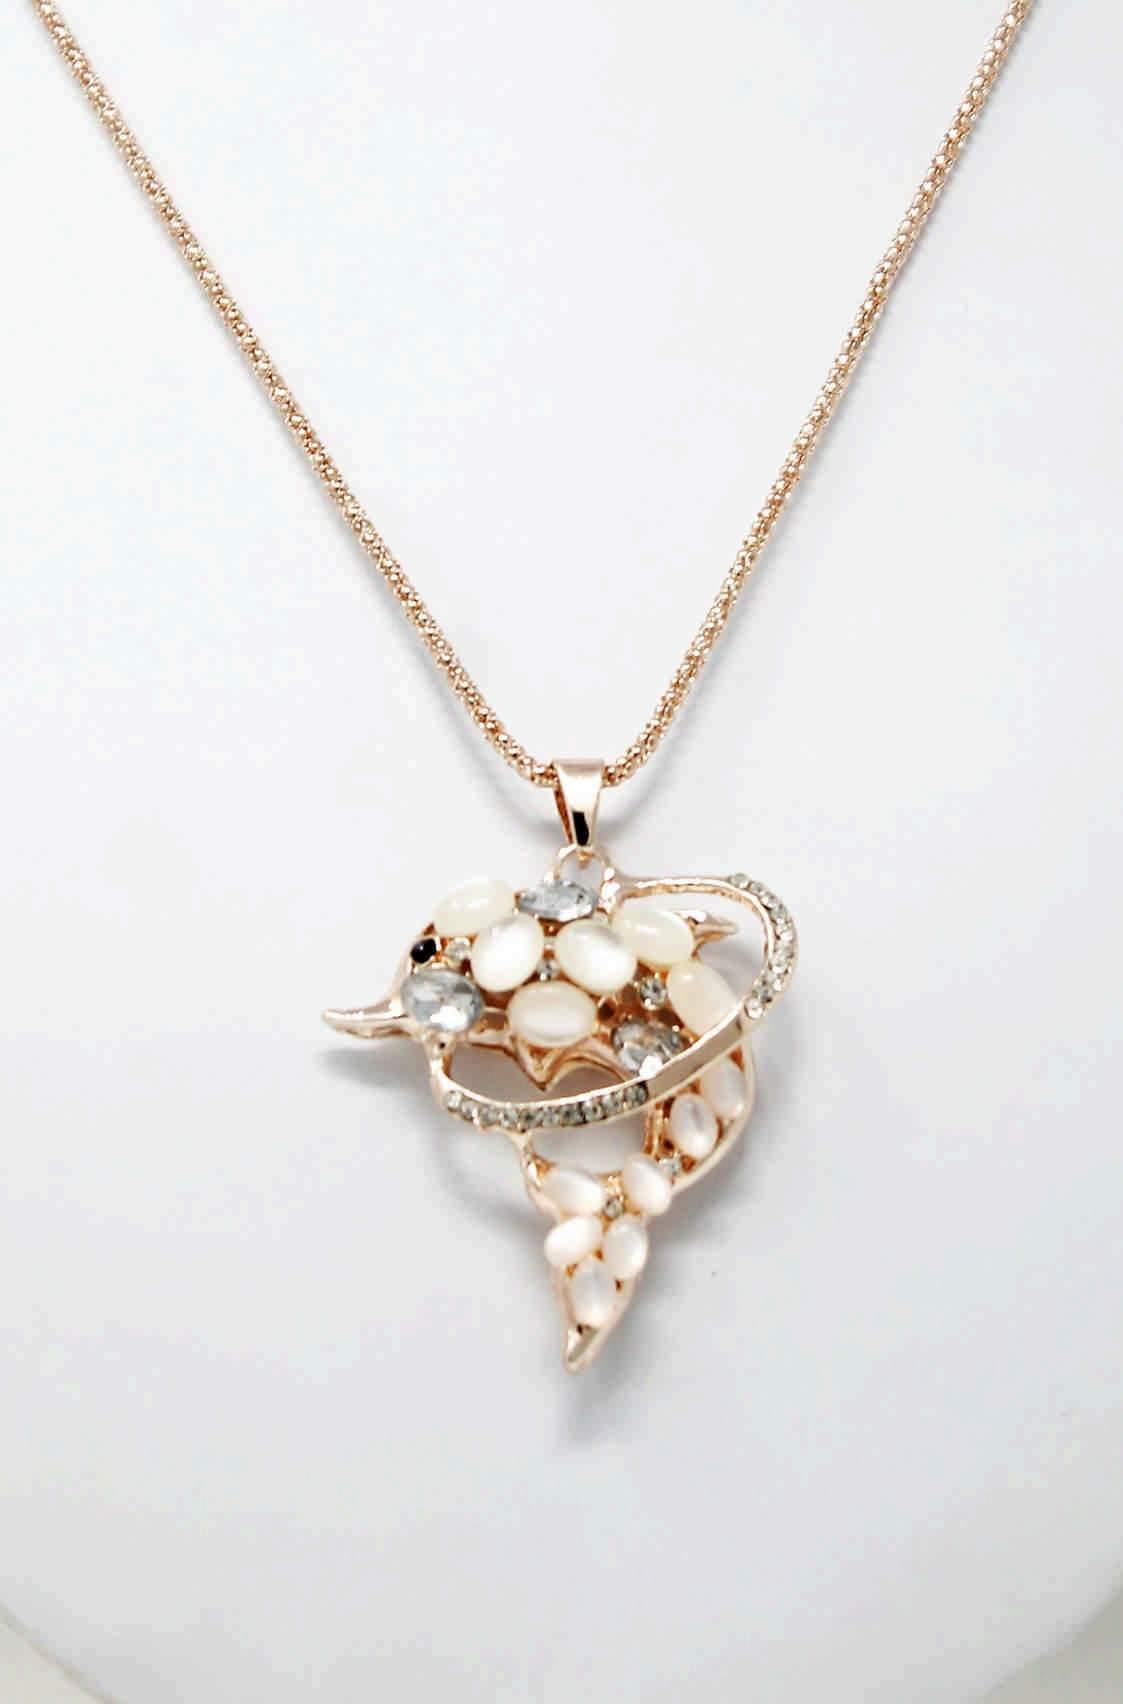 Rhinestones Studded Dolphin in Ring Design Imitation Fashion Pendant with Long Chain for Females